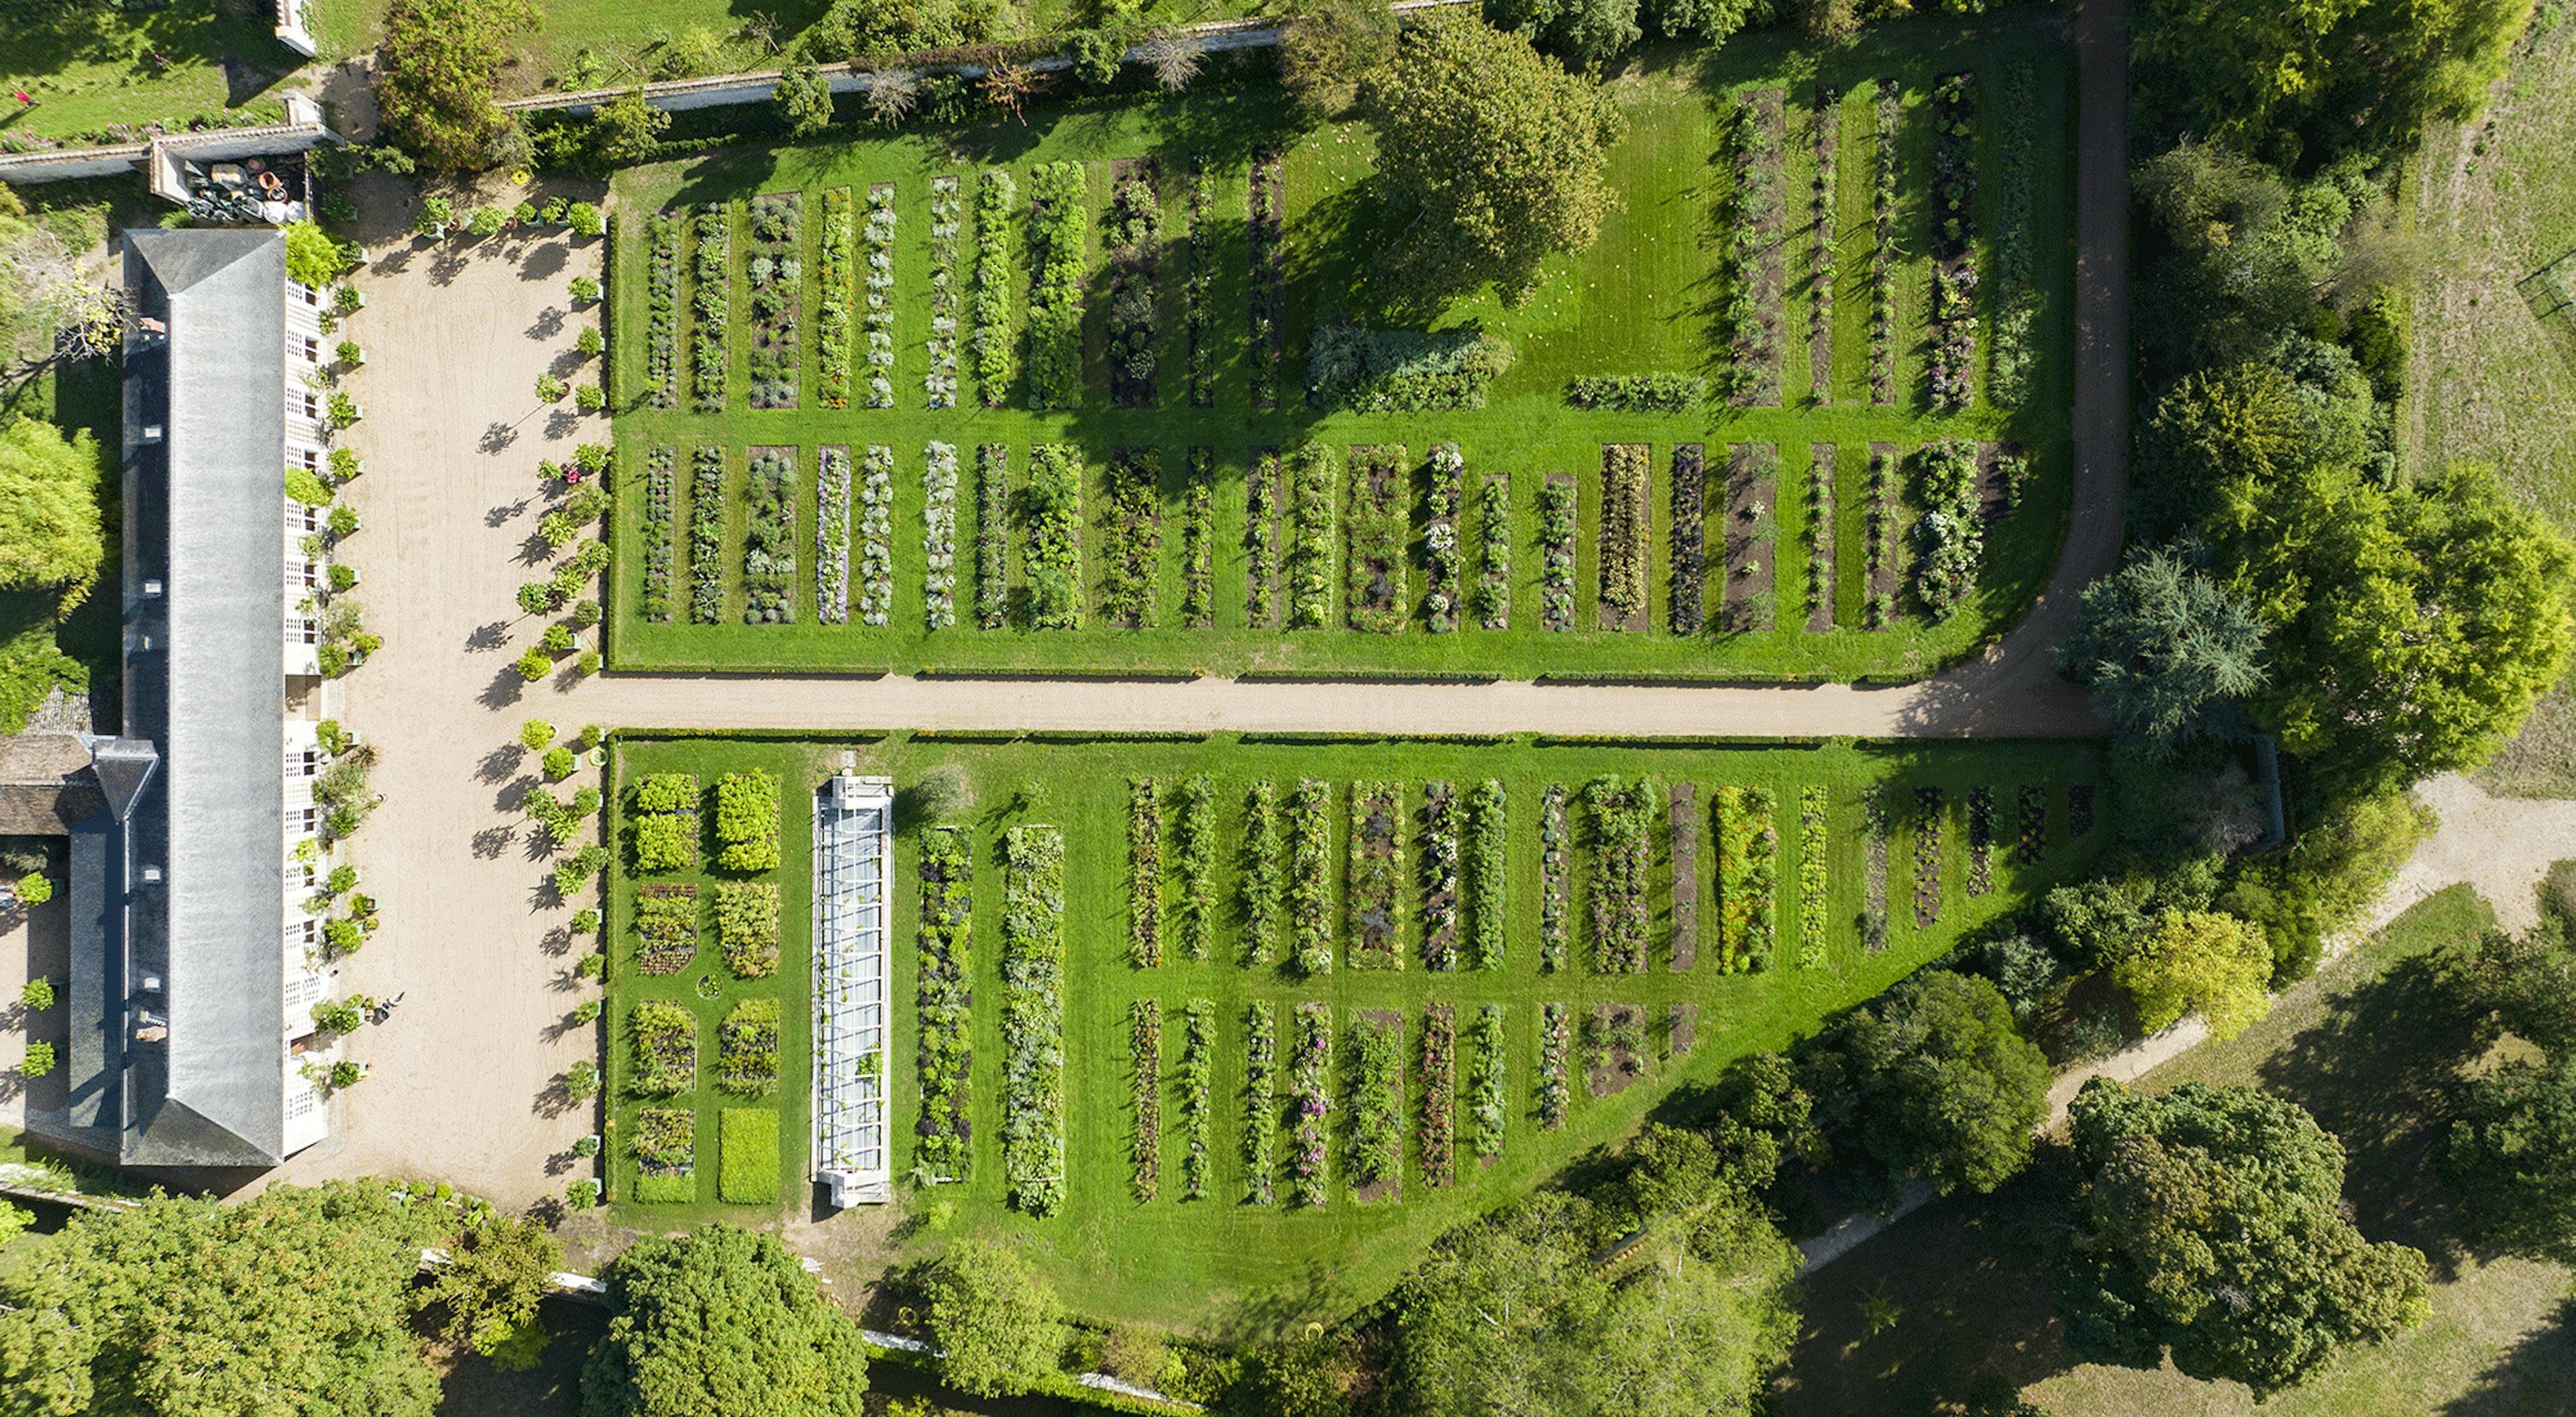 Cover - The Perfumer’s Garden in Versailles now open to the public